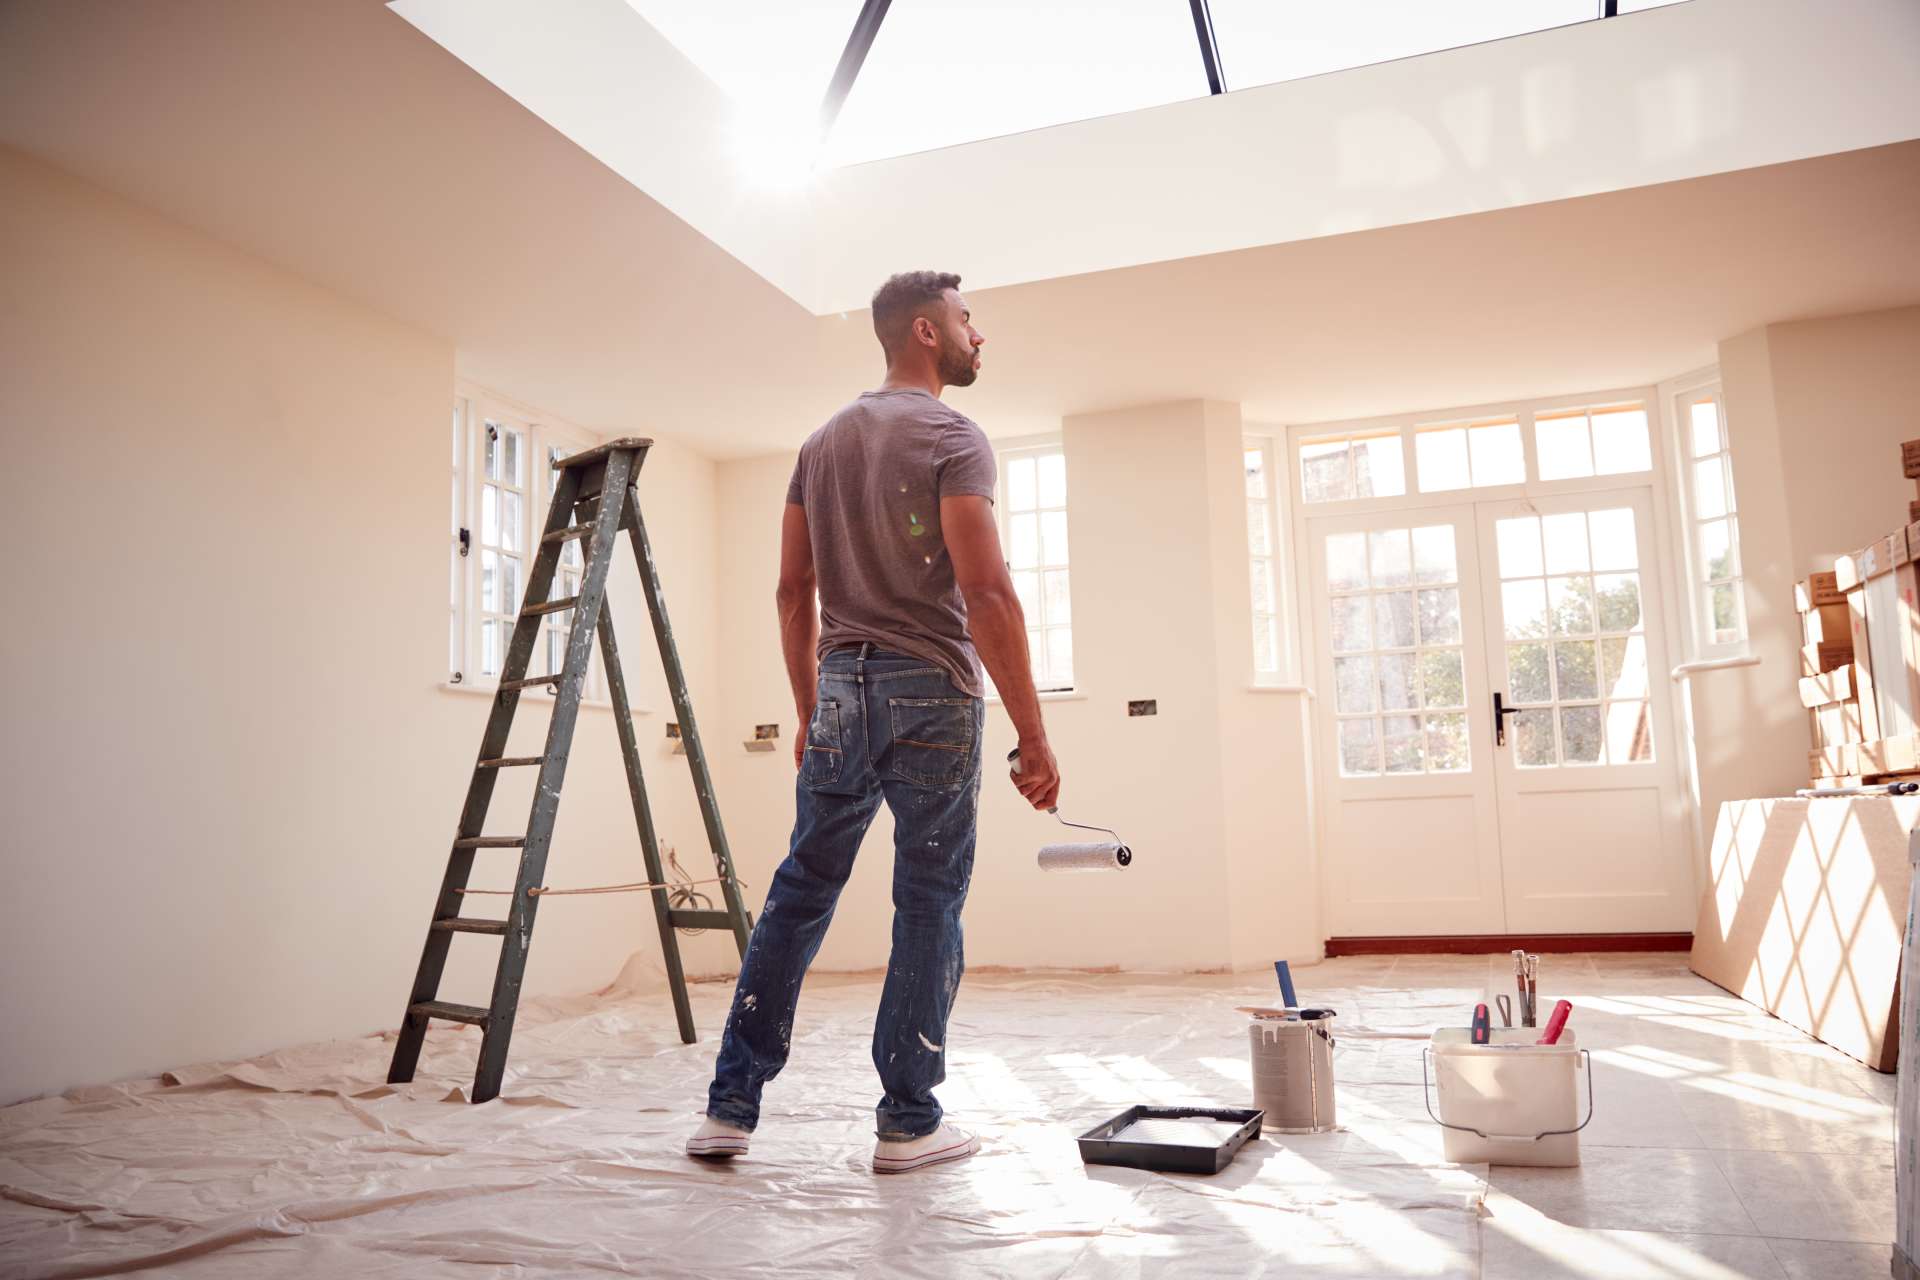 House Painters - Pro or Amateur - We got some tips for You